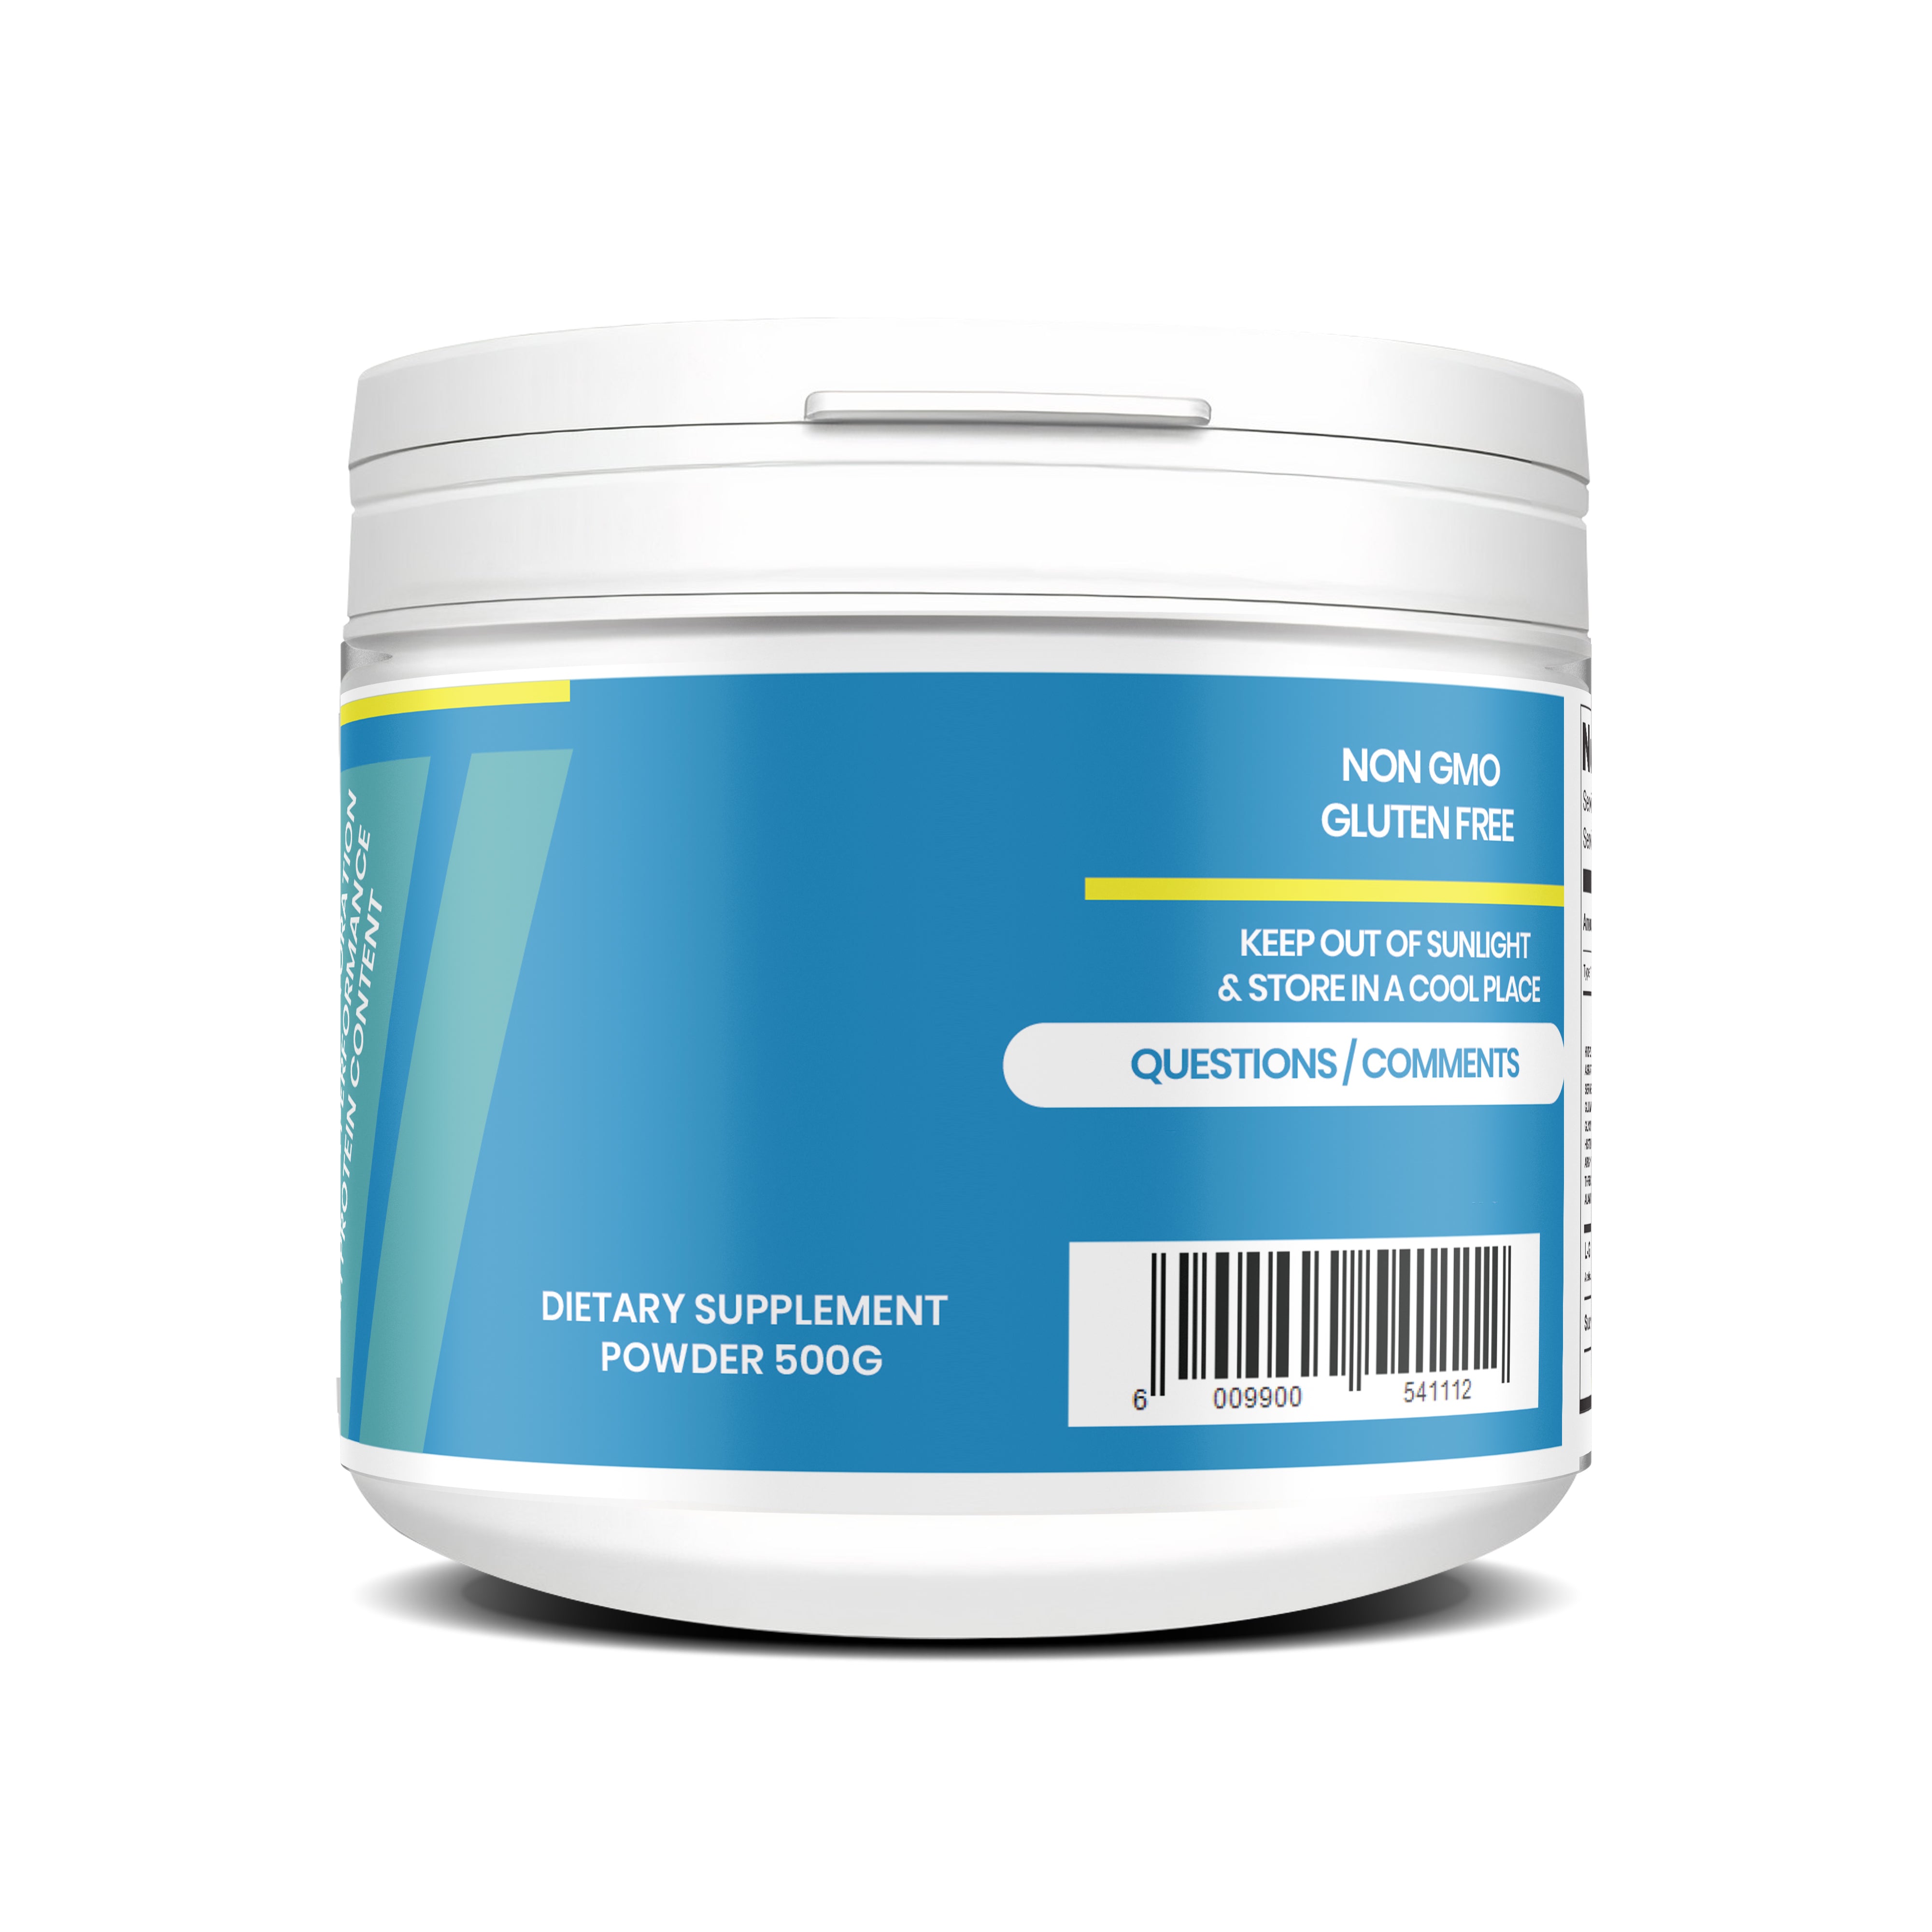 Optimum Collagen Active+ 10,000mg L-GLUTAMINE 5000mg 500g Scientifically Formulated To Help Active Men And Bodybuilders Improve Athletic Performance.